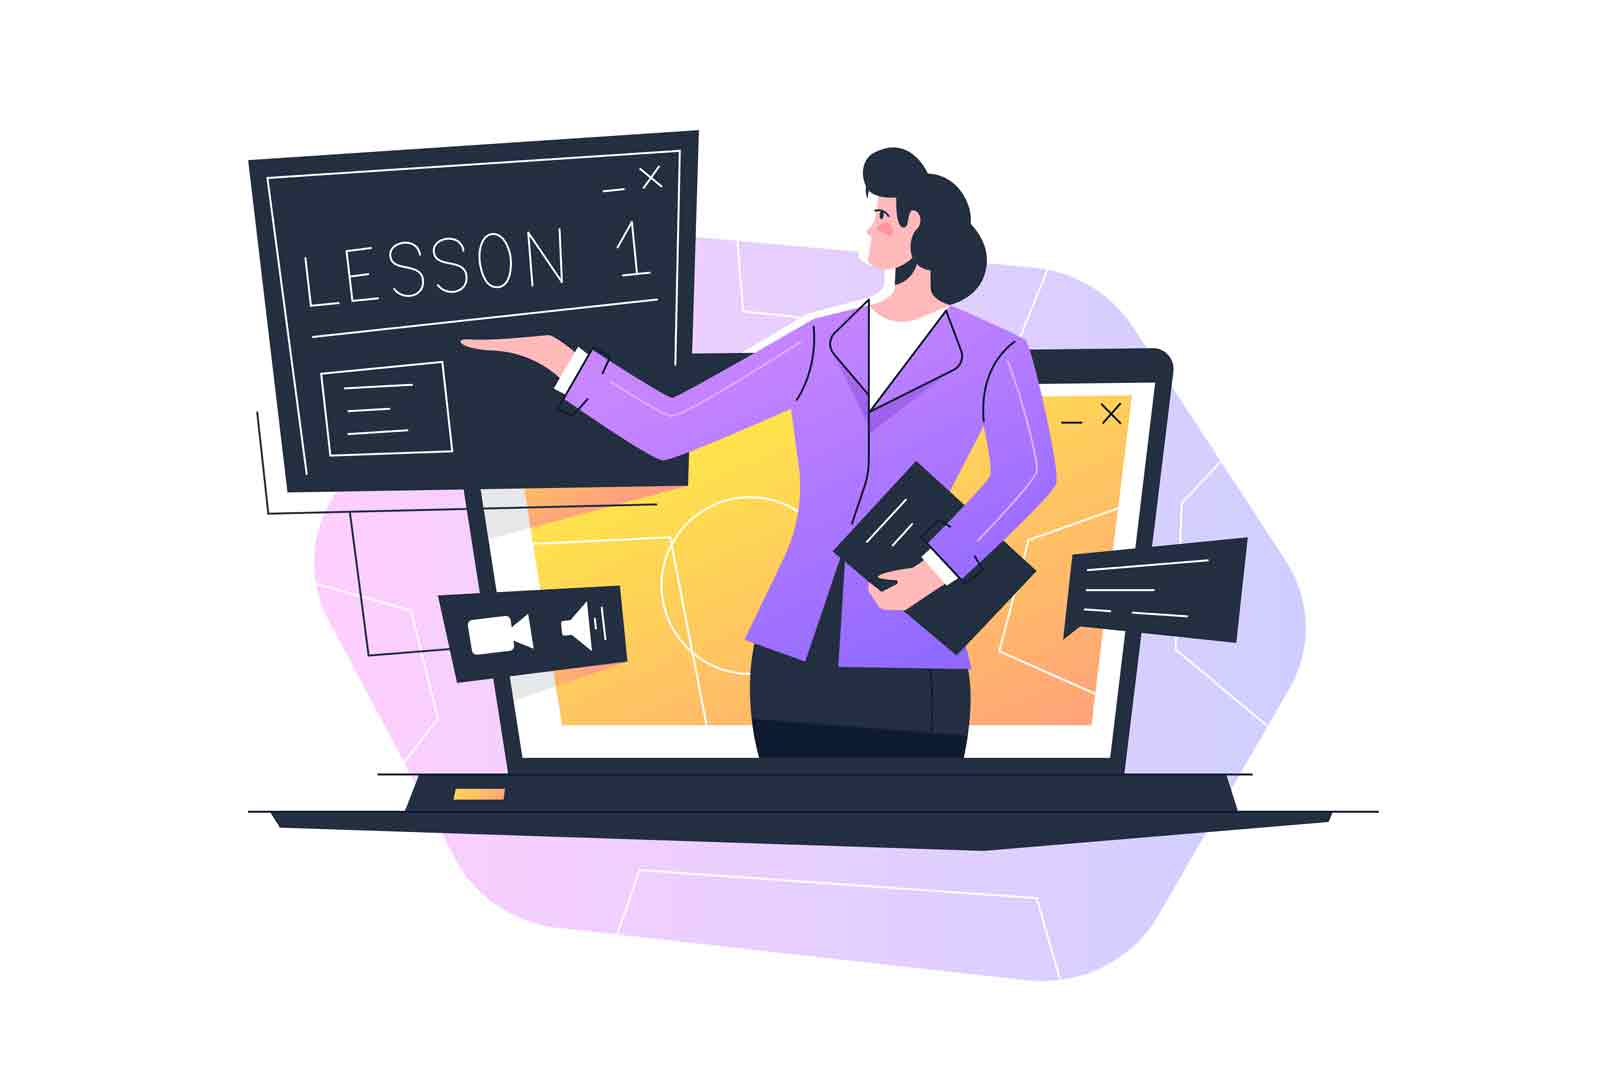 Online teacher or e-learning and distance learning vector illustration. Online education, home schooling flat style concept